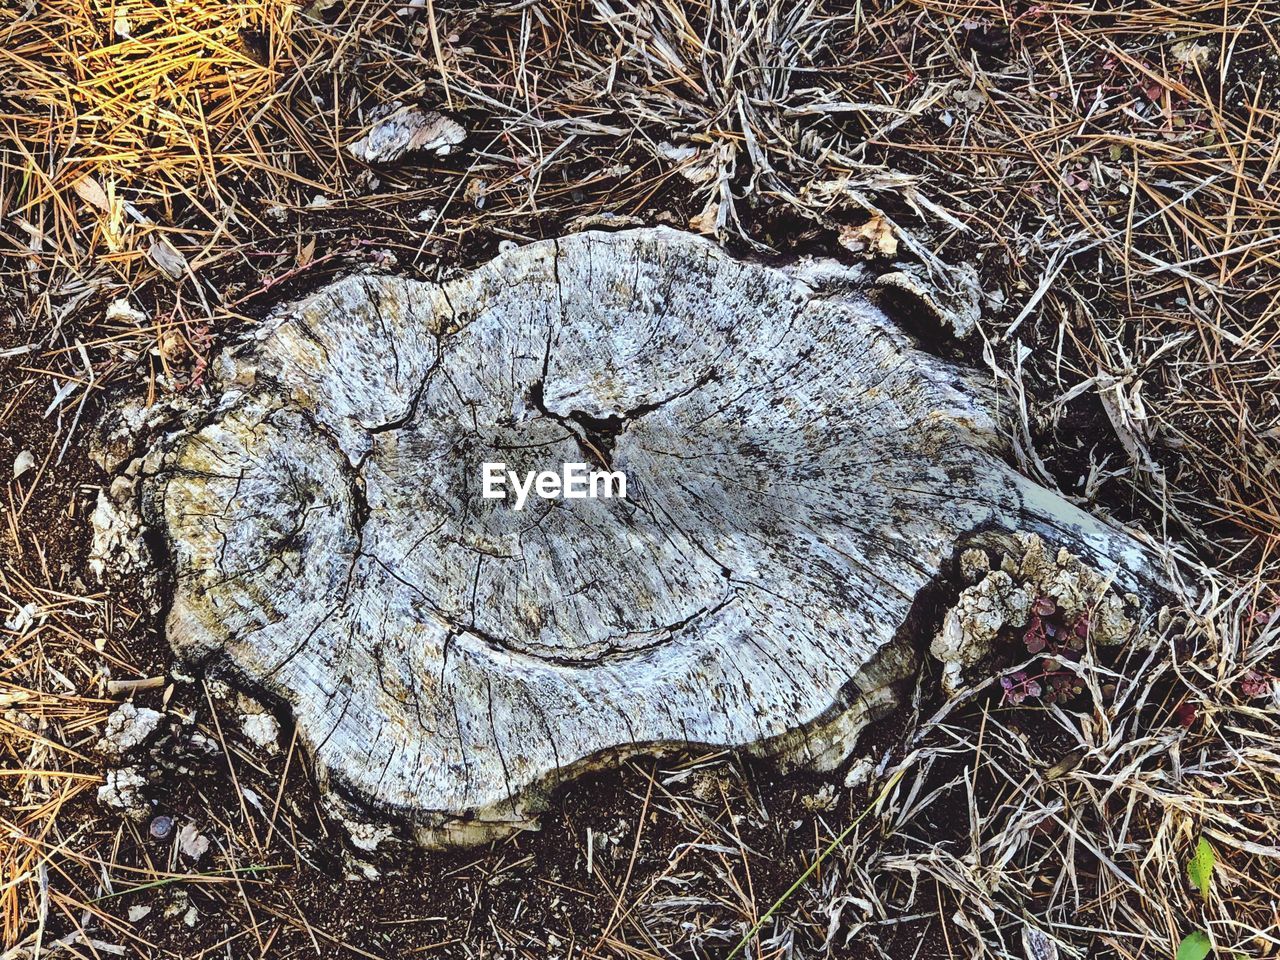 HIGH ANGLE VIEW OF TREE STUMP IN FOREST